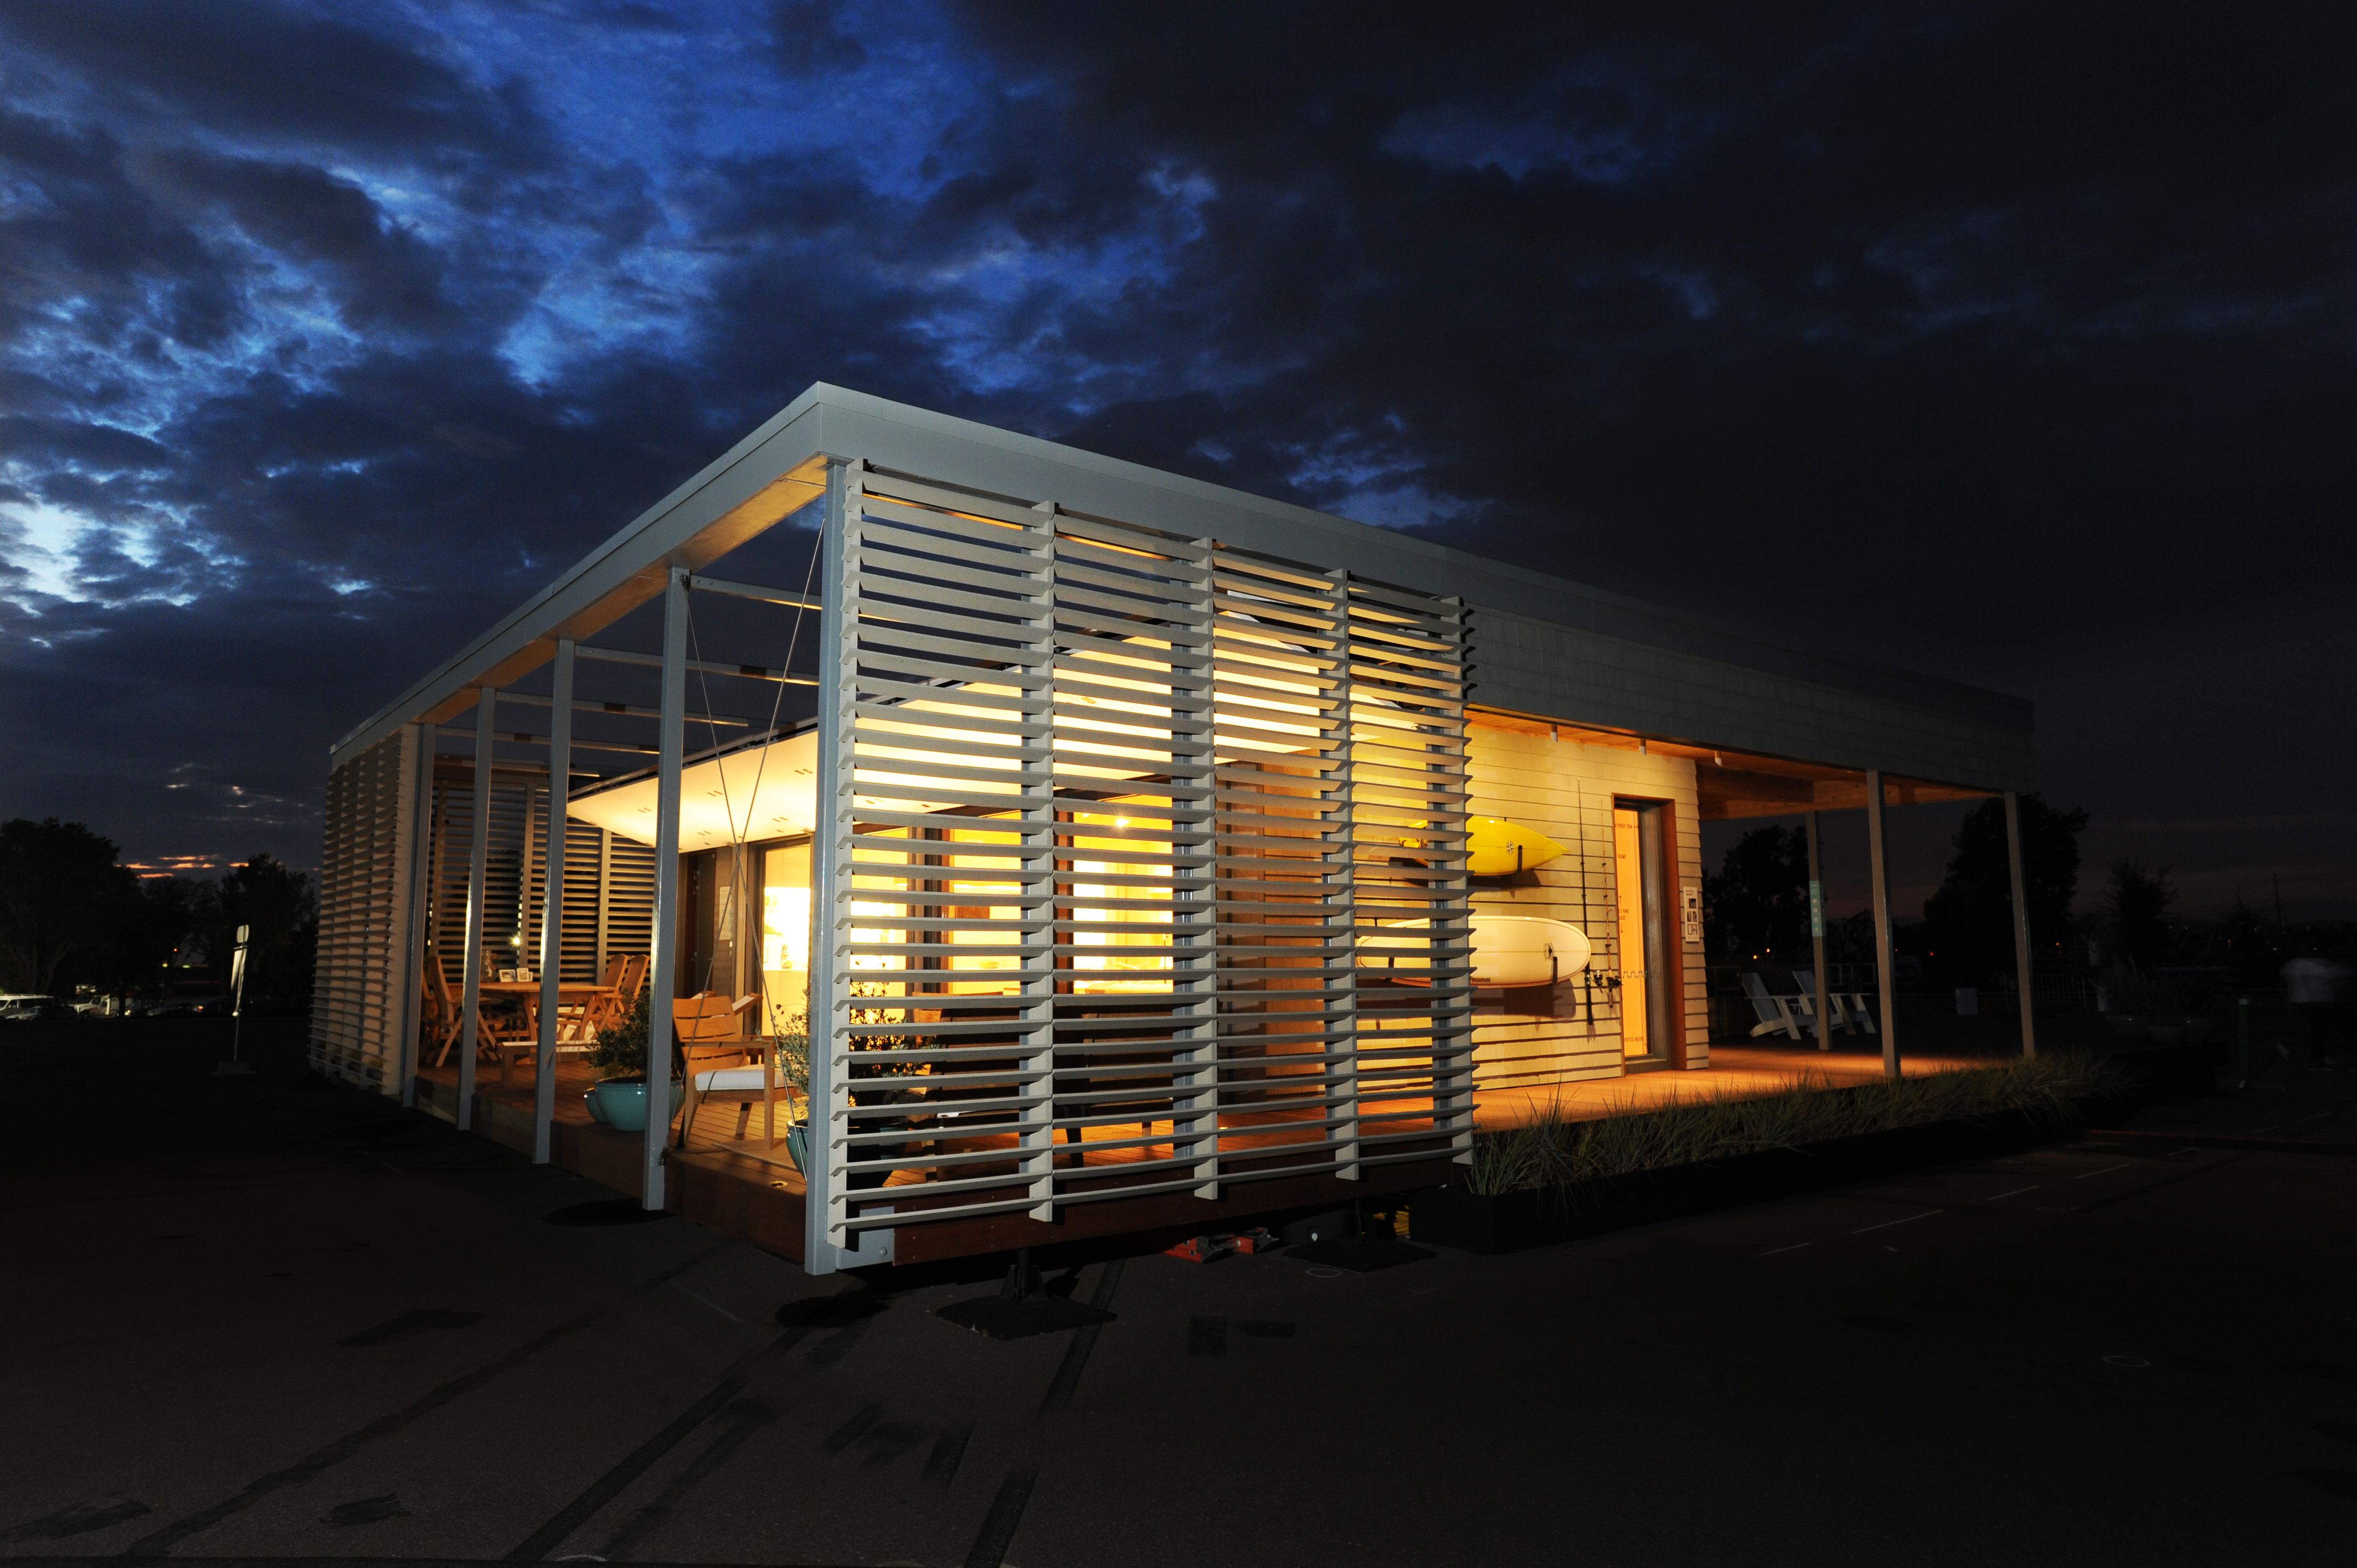 What Is the US Solar Decathlon